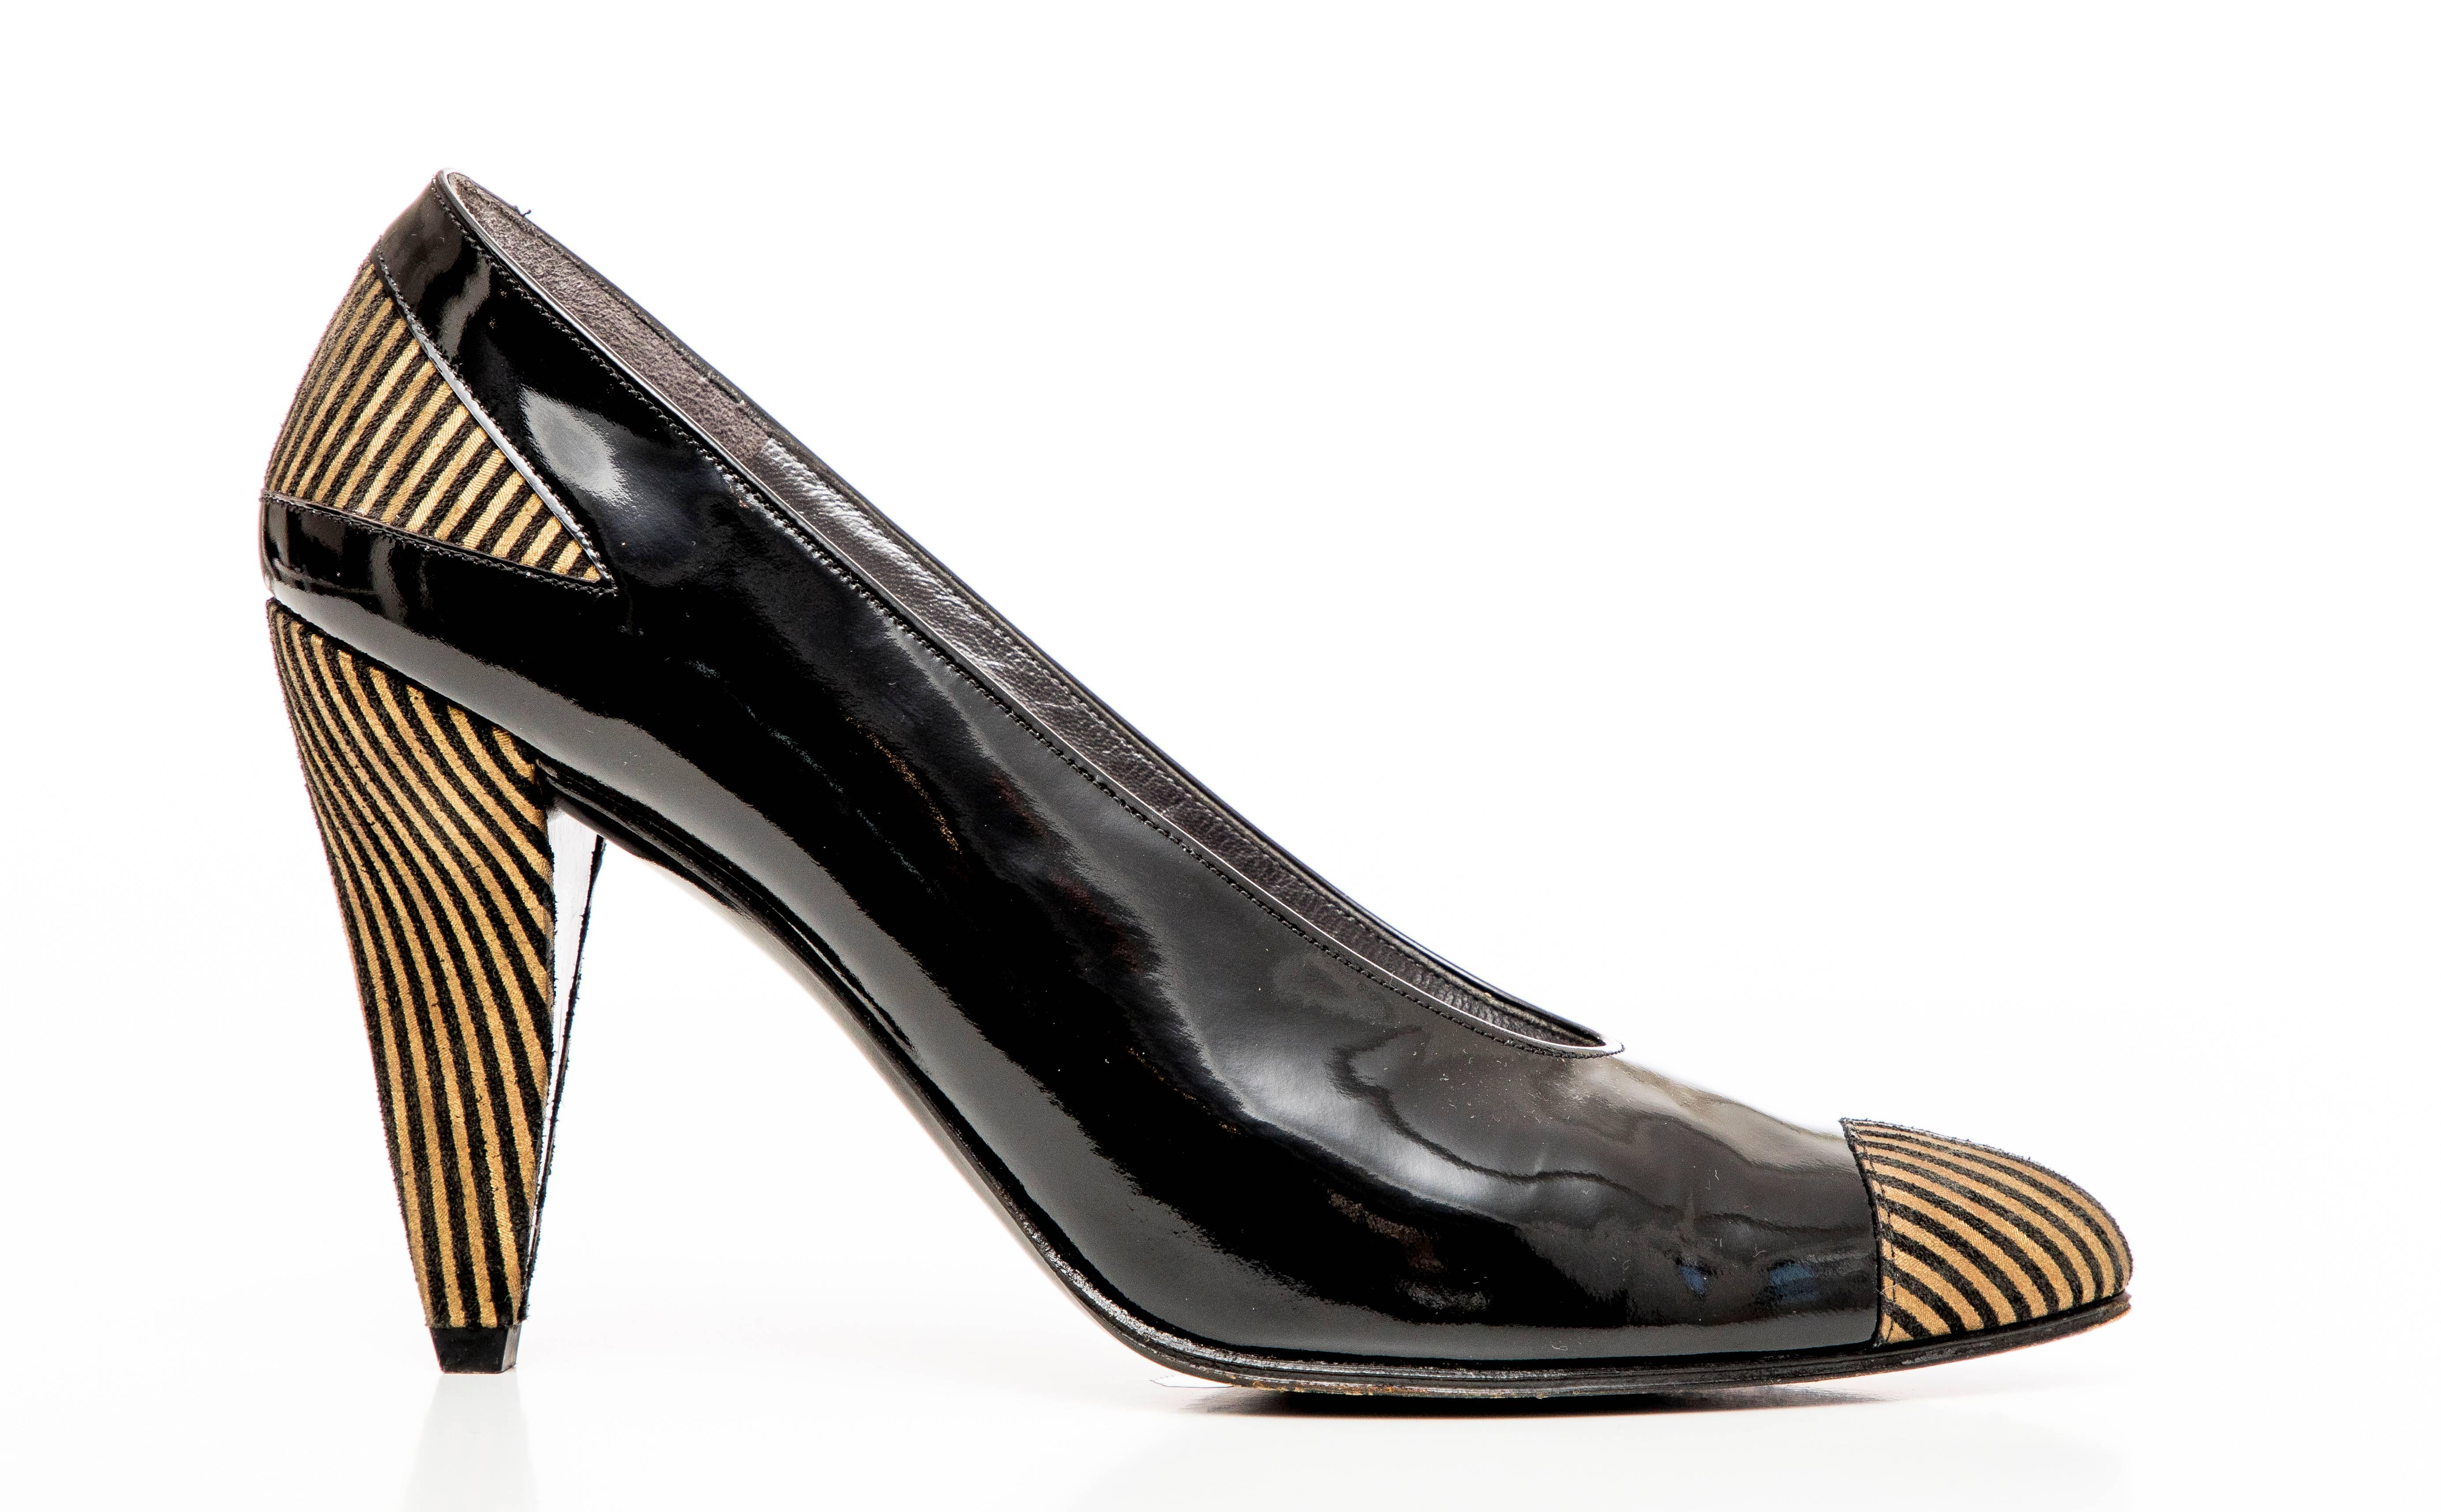 Charles Jourdan 1980s black patent leather cone heels with striped silk faille toe and heel detail. 

EU. 37.5
US. 7.5